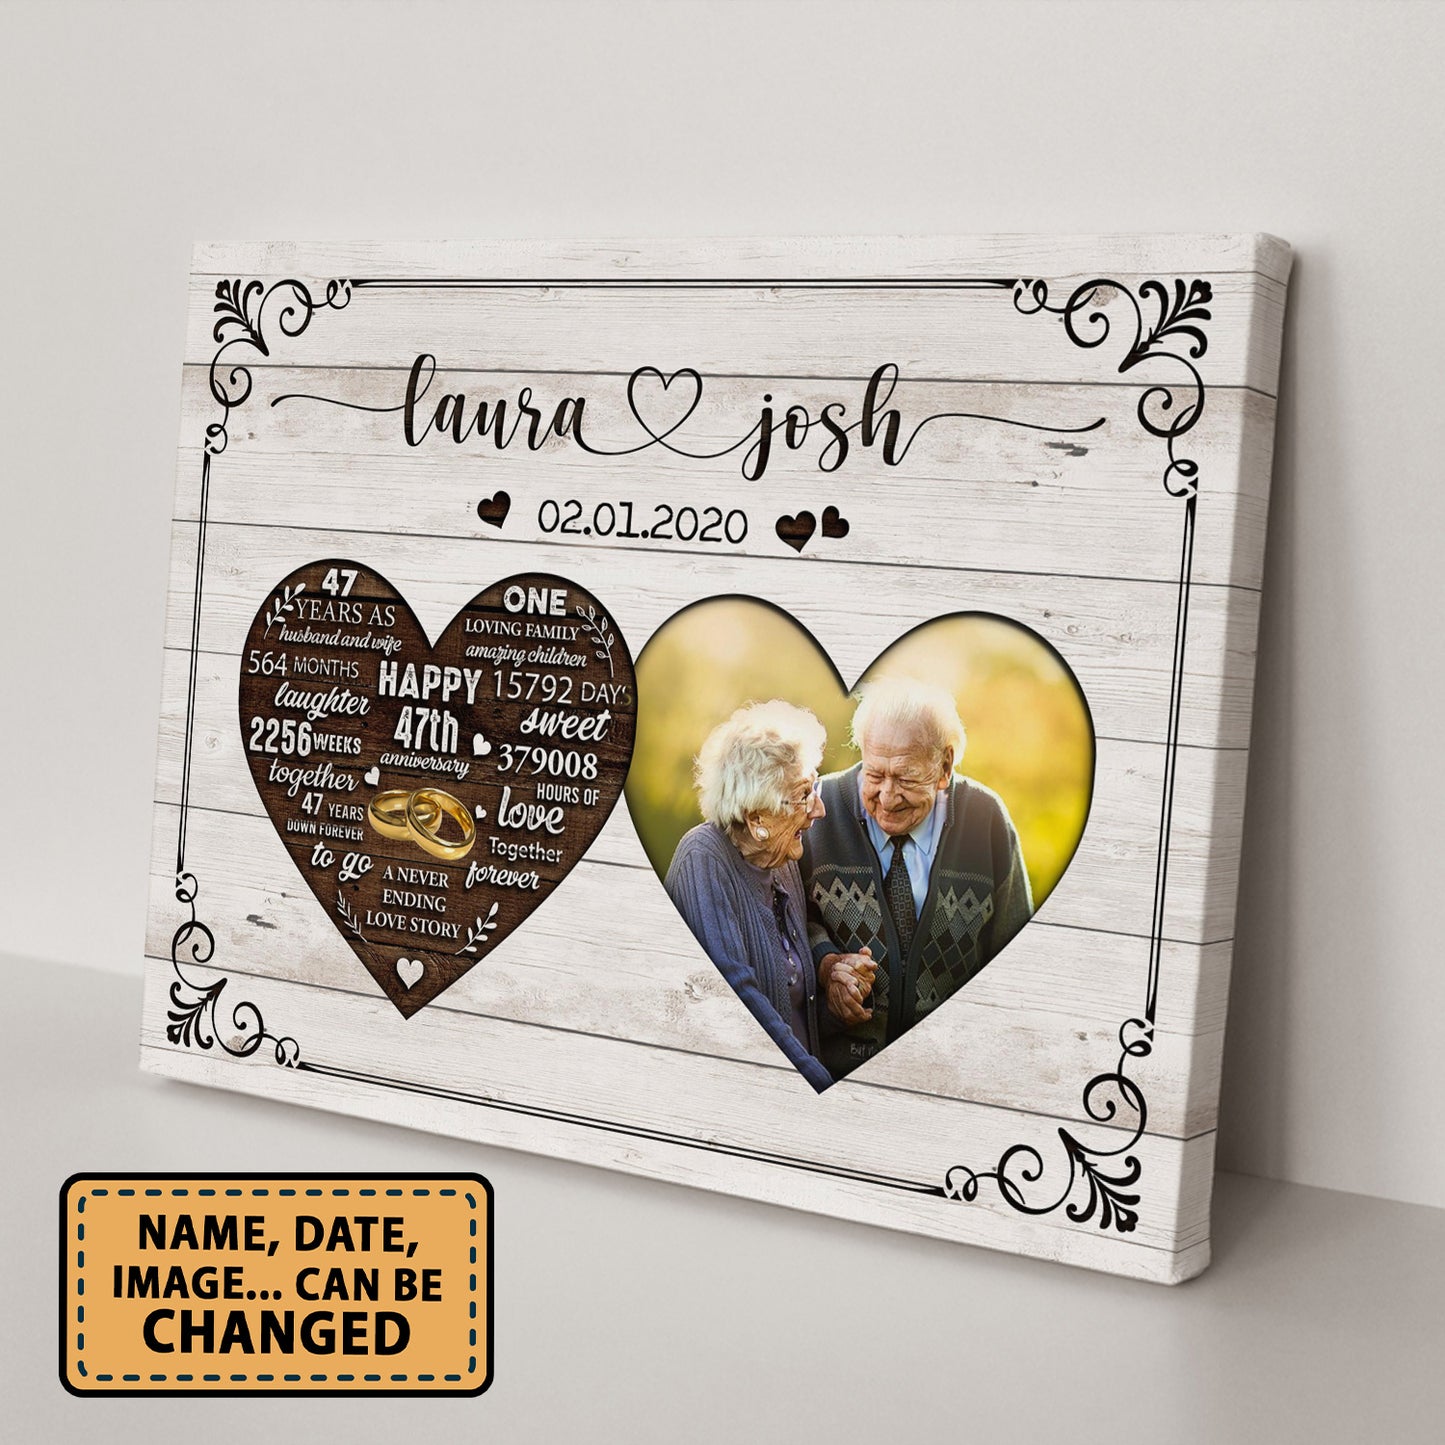 Happy 47th Anniversary As Husband And Wife Anniversary Canvas